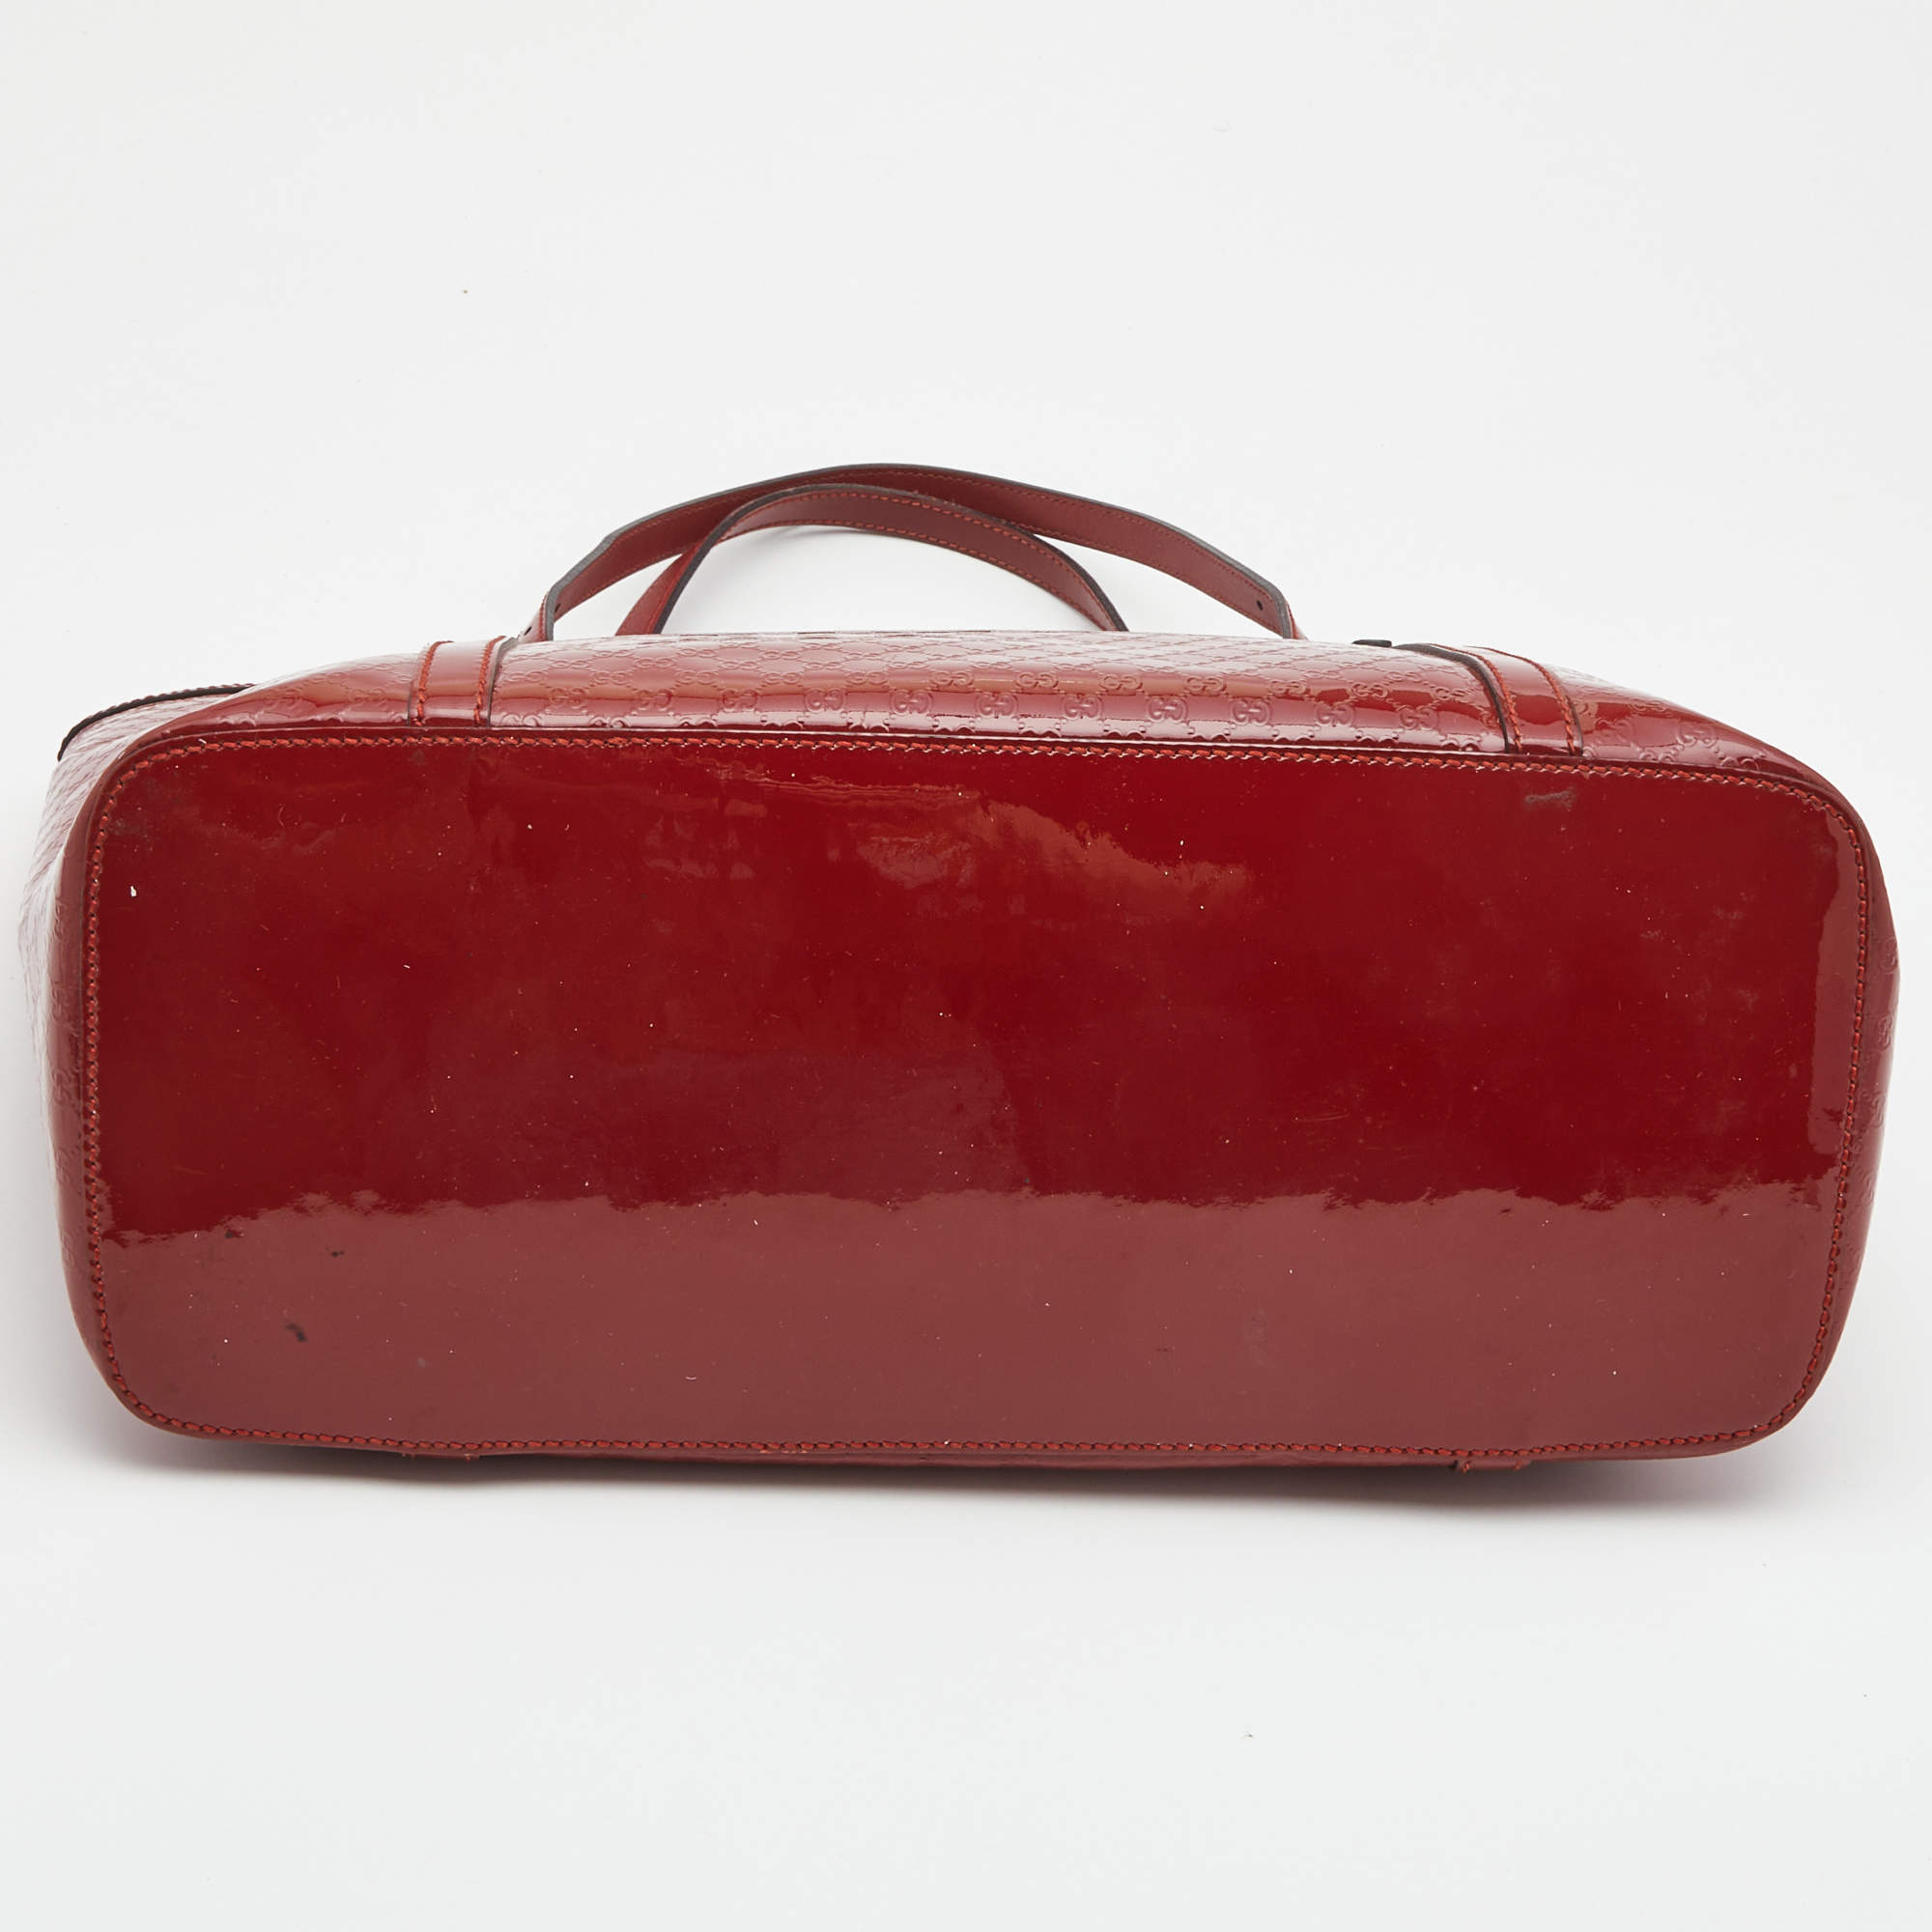 Gucci Microssima Patent Leather Carry-on Suitcase in Red for Men